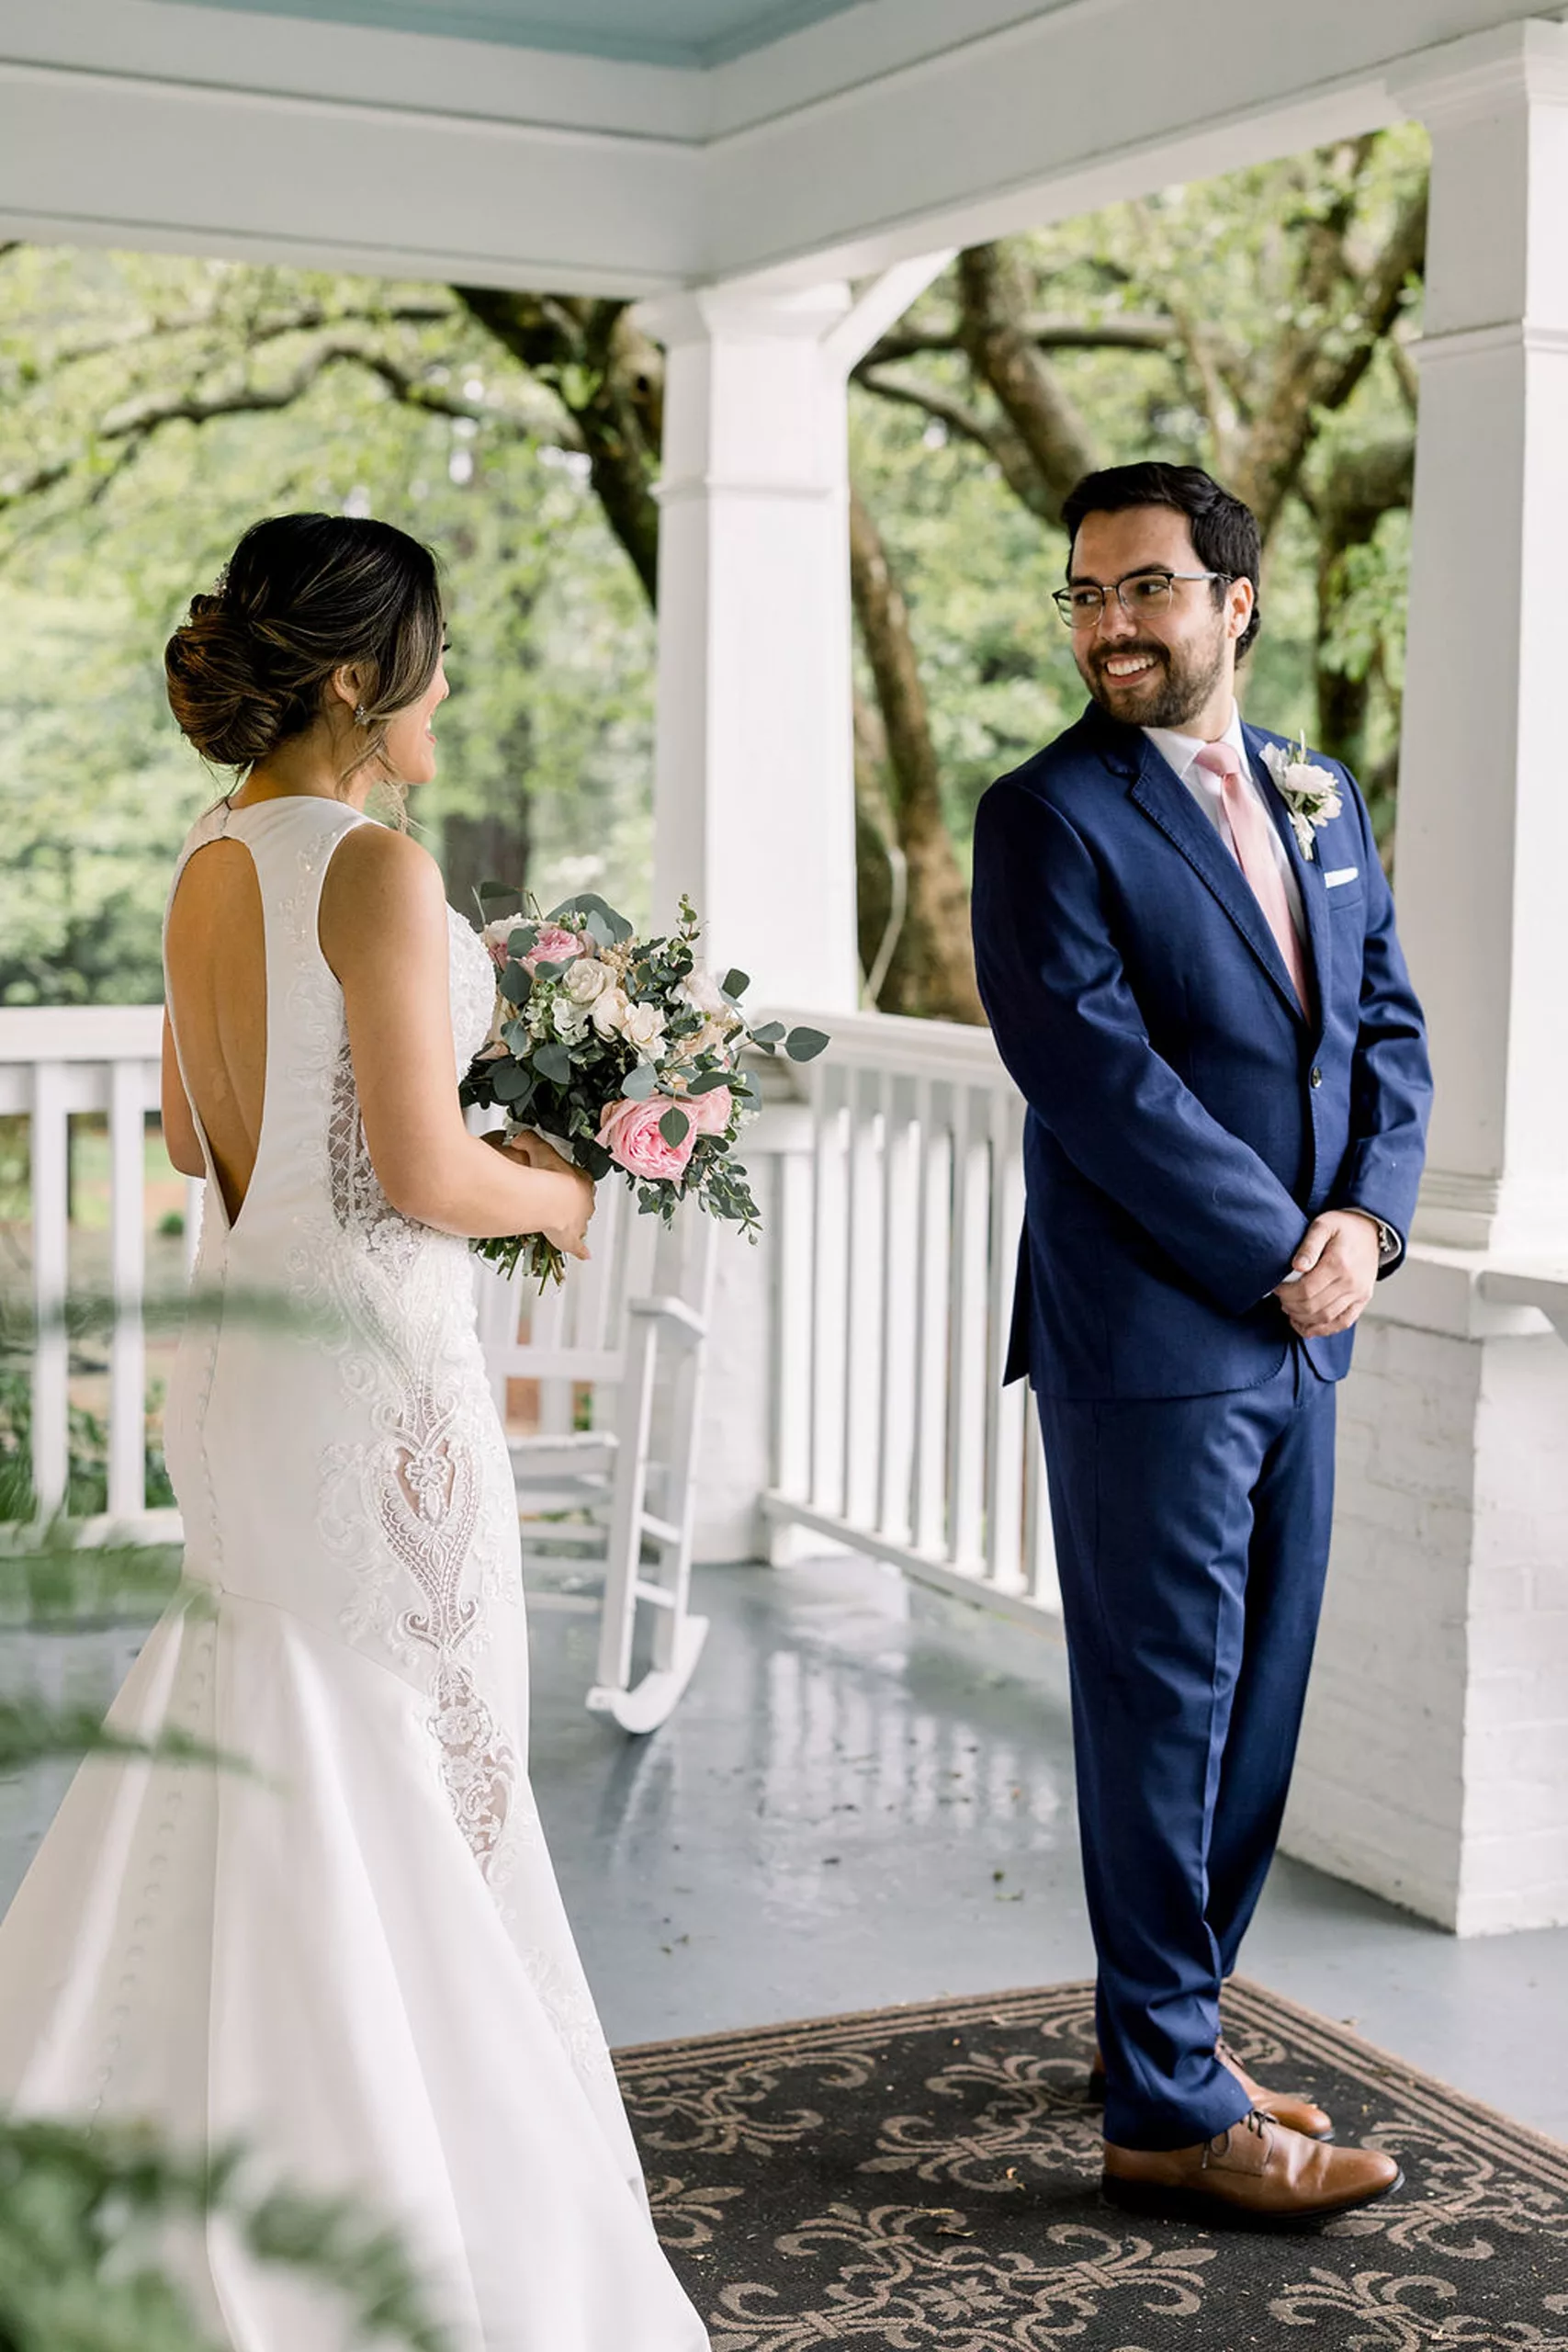 A groom turns around on a porch to see his bride for the first time in her dress during a first look